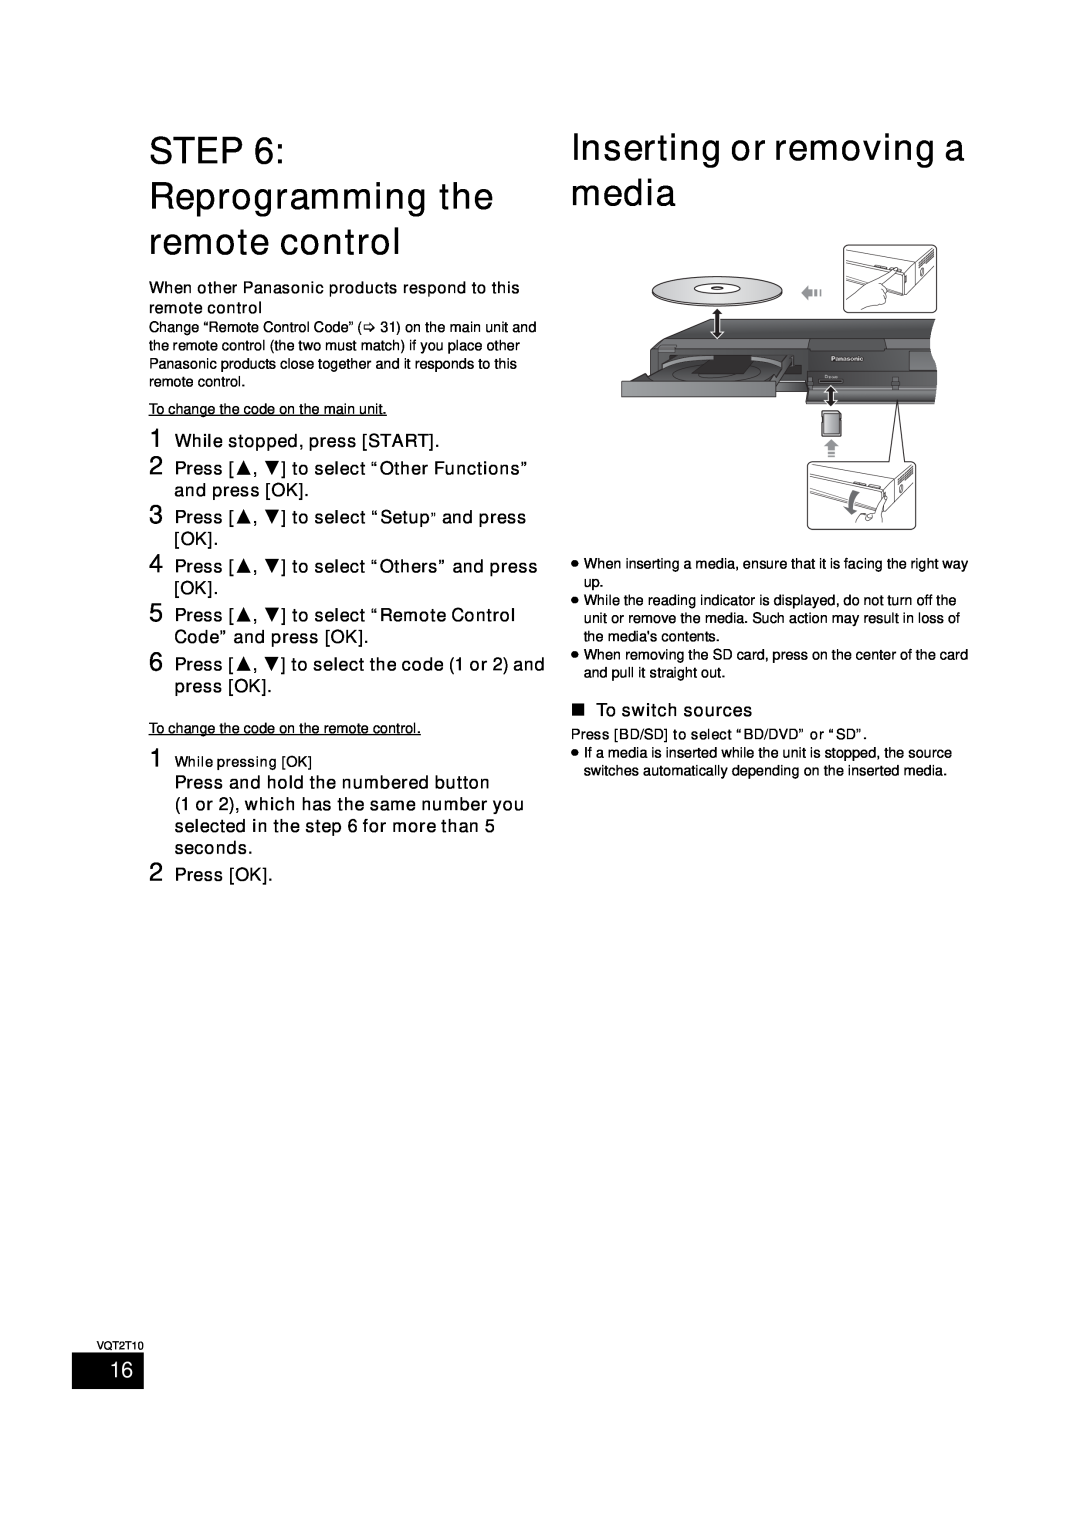 Panasonic SC-BT228 Reprogramming the remote control, Inserting or removing a media, While stopped, press START, Press OK 